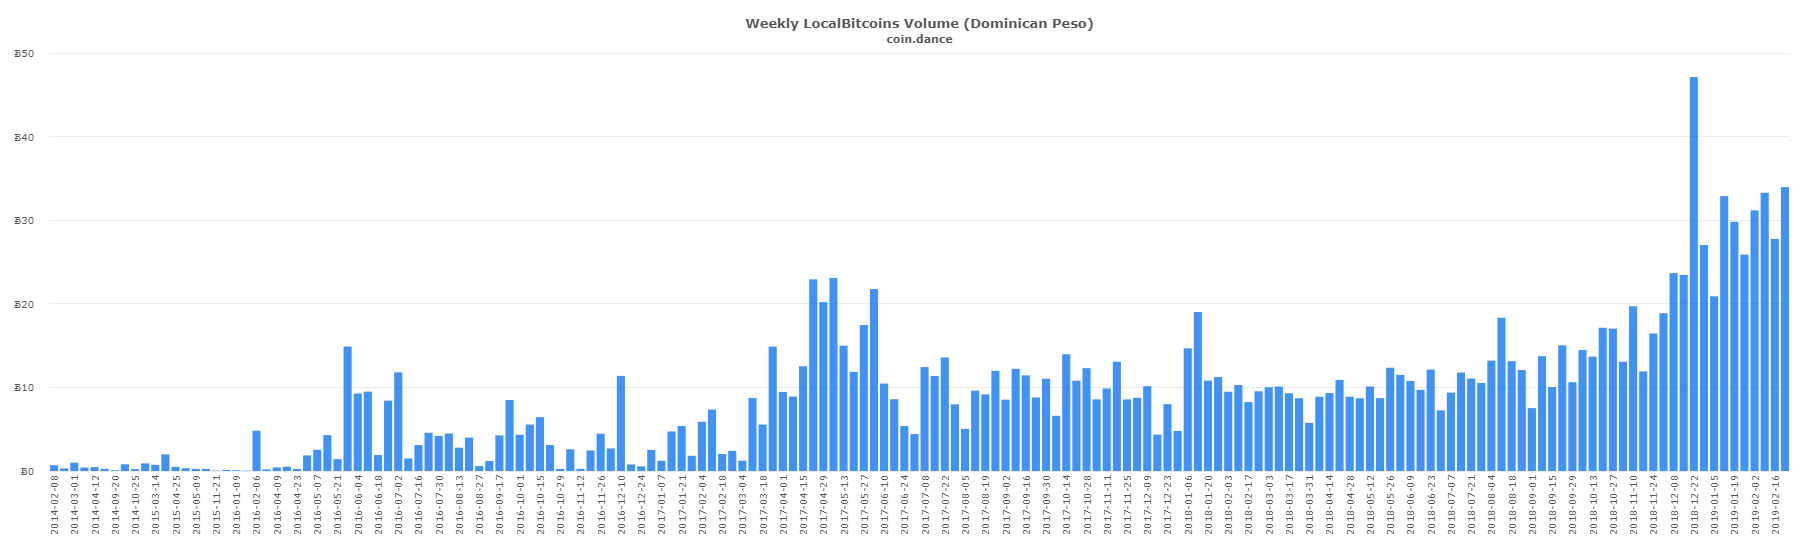 P2P Markets Report: Iranian Localbitcoins Volume Gains 190% in a Week